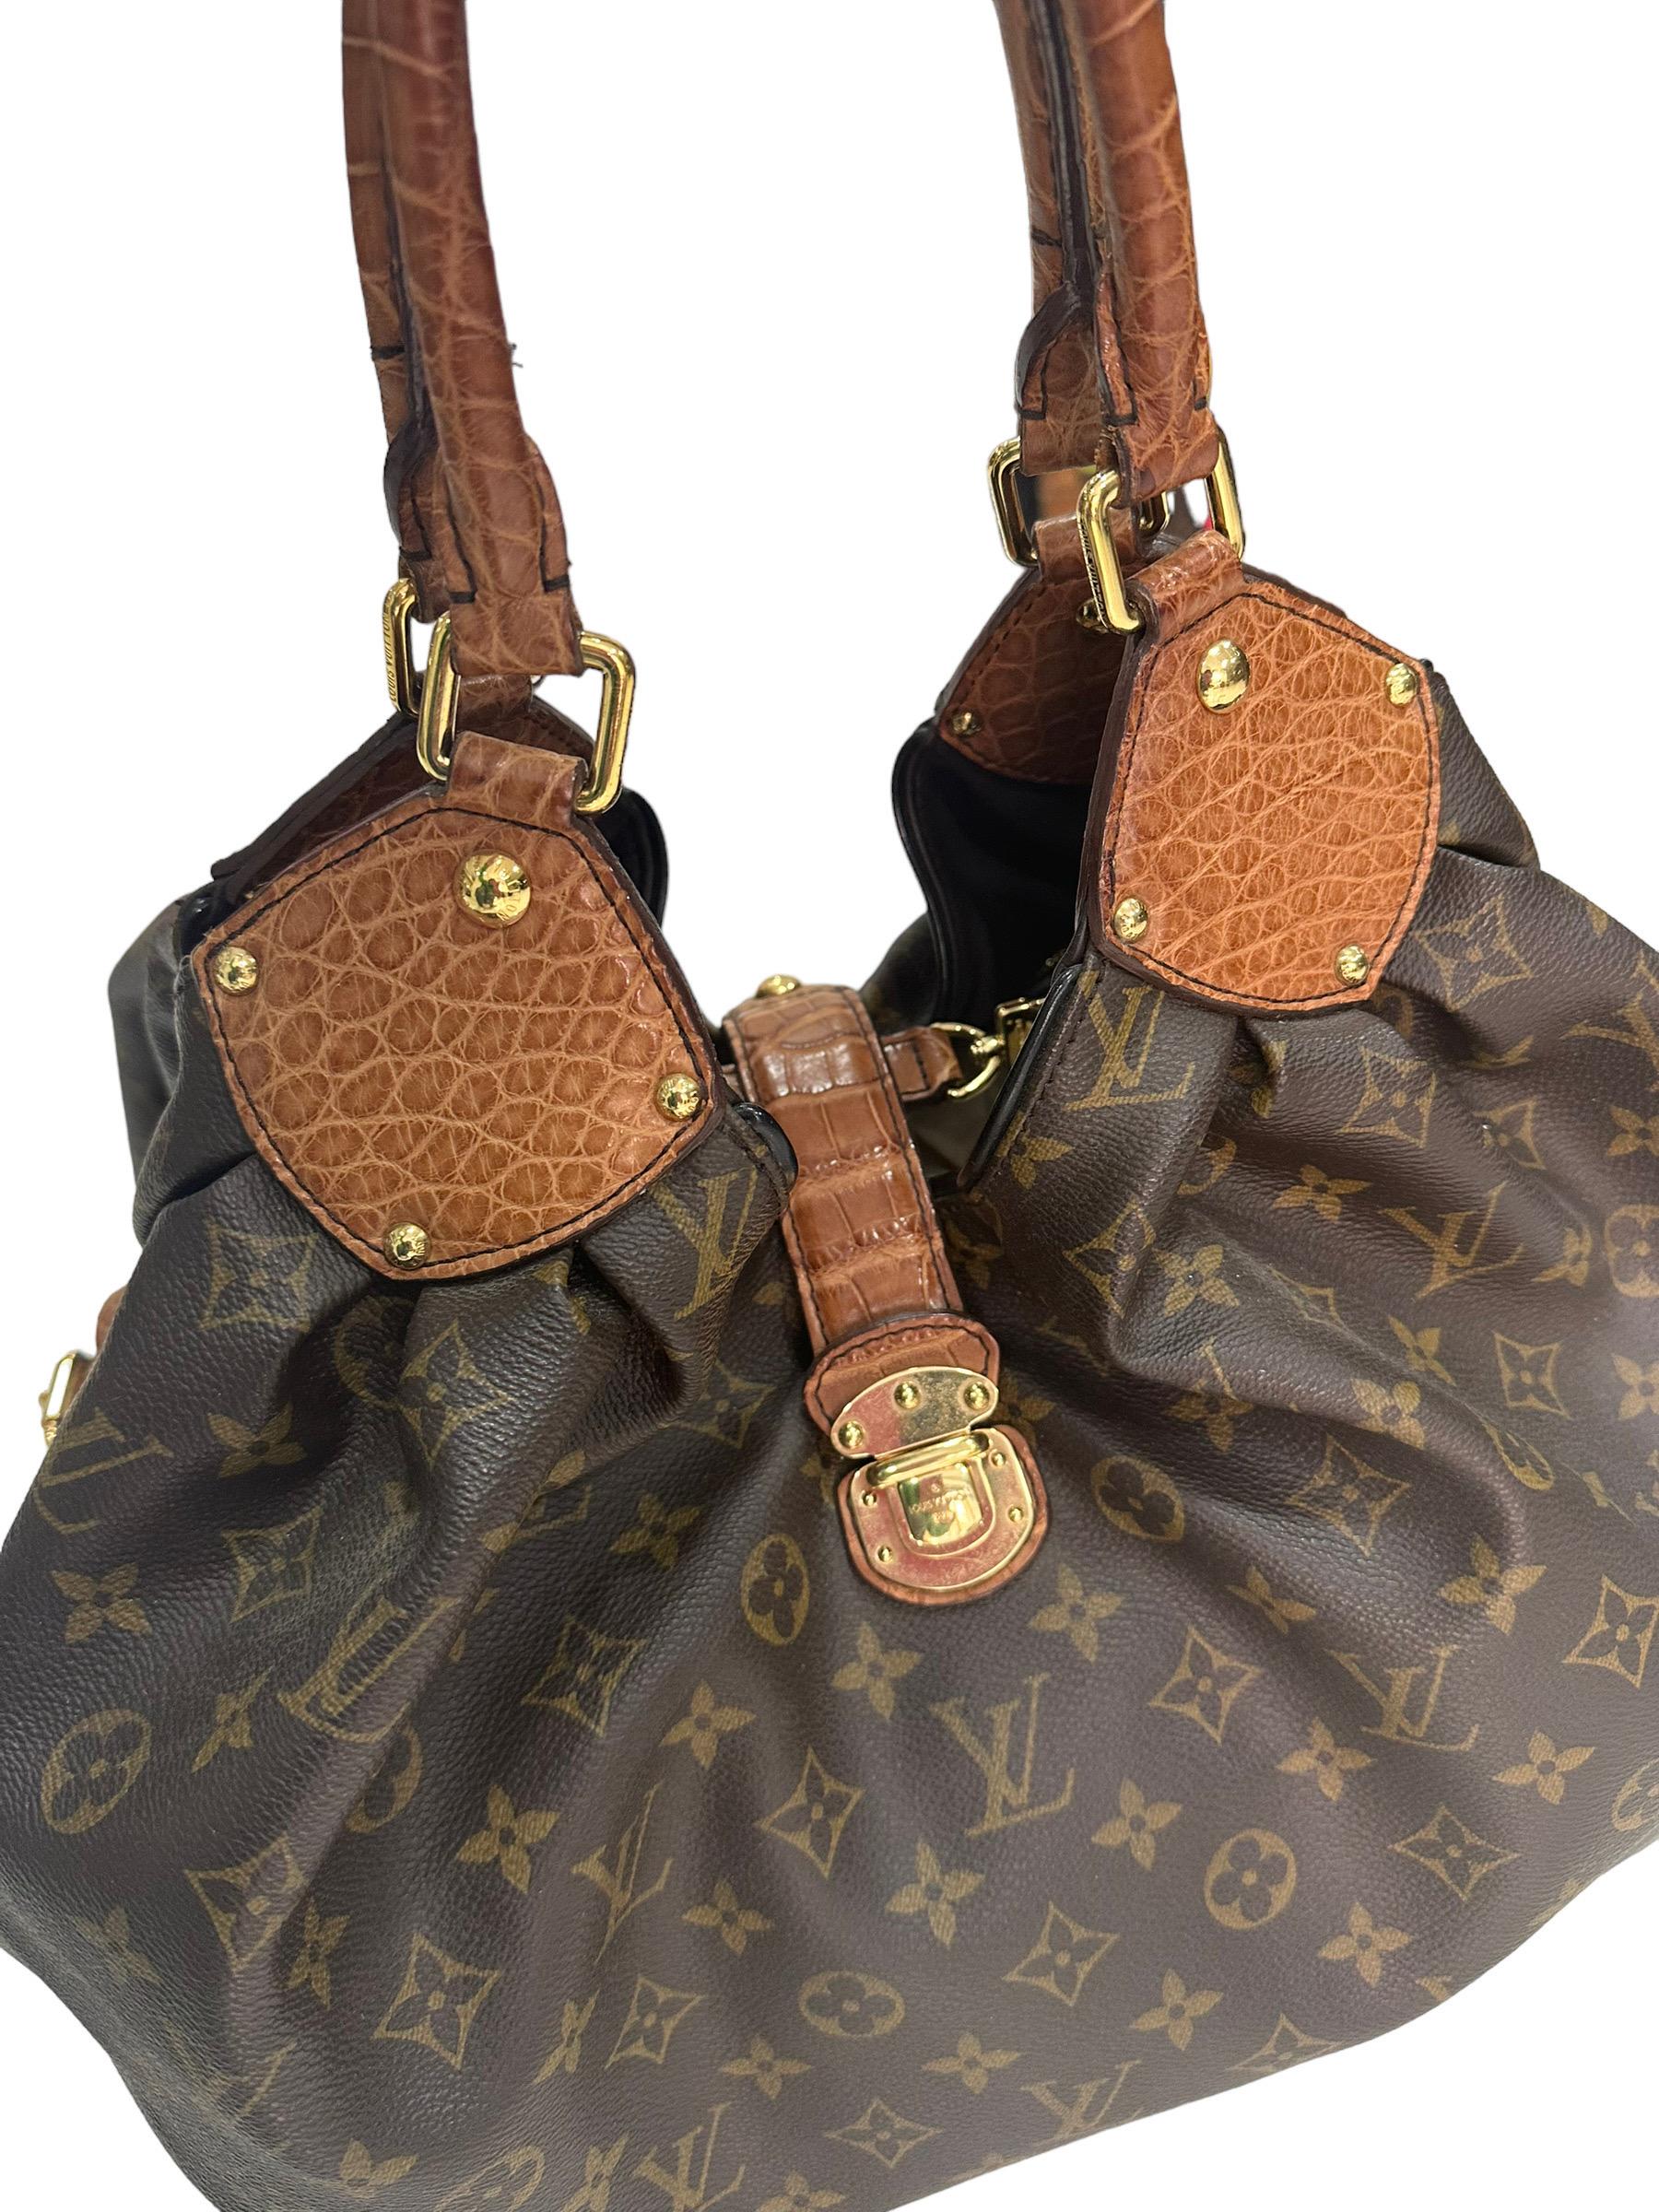 Shoulder bag signed Louis Vuitton, Surya model in limited edition, made of monogram canvas with alligator inserts and golden hardware.
The product is equipped with an interlocking closure, internally lined in brown leather, very roomy and equipped